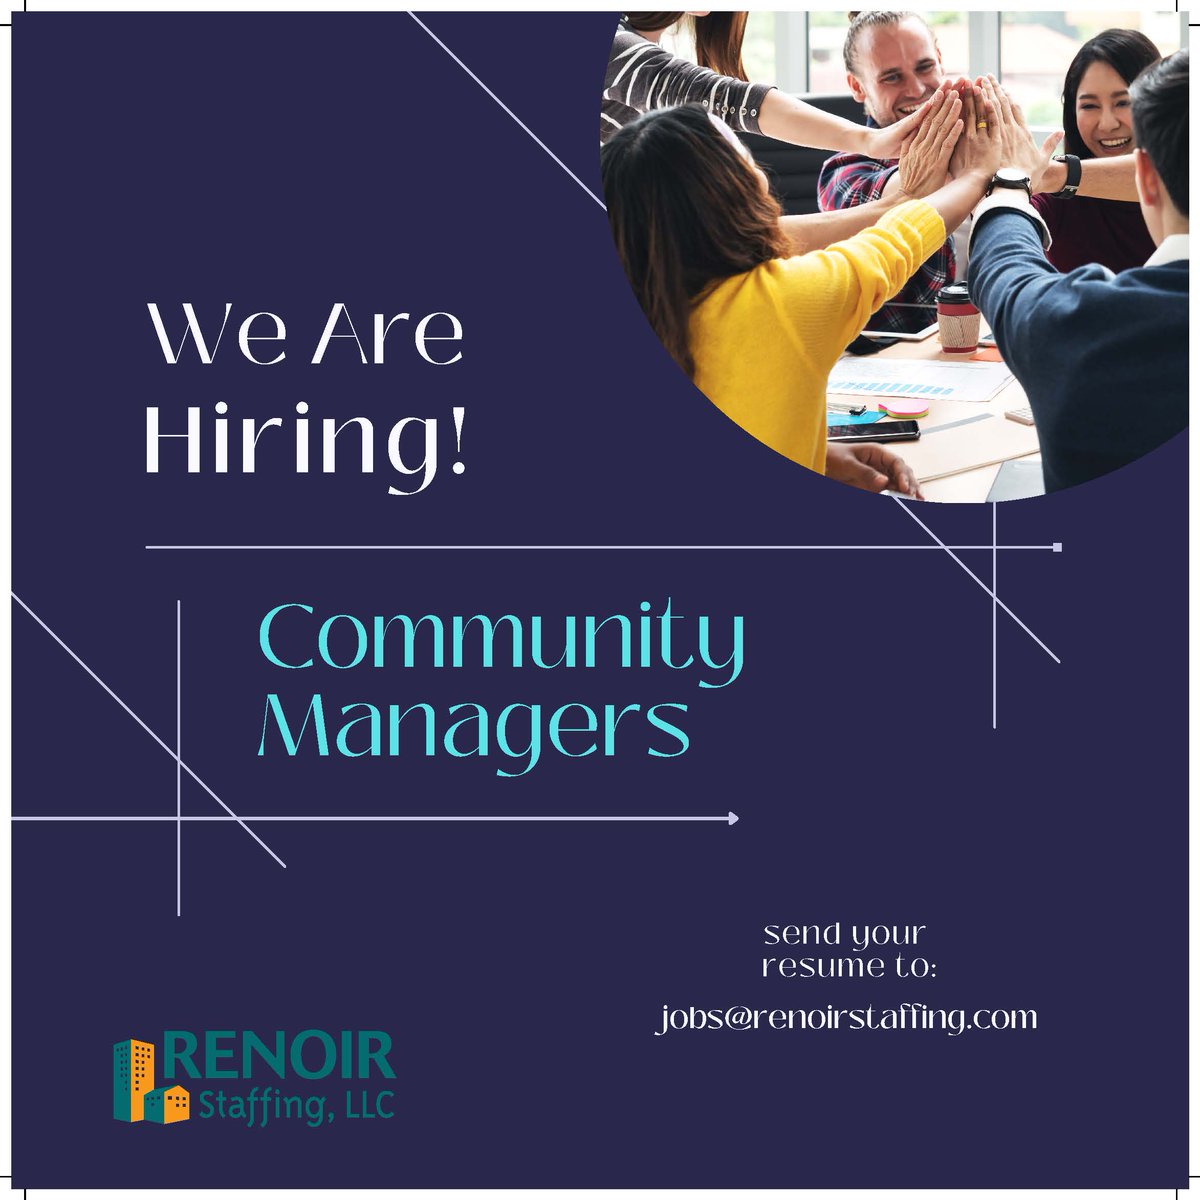 Looking for team players who are customer service driven! 

Apply today: jobs.renoirstaffing.com 

#propertymanagement #communitymanagers #hiring